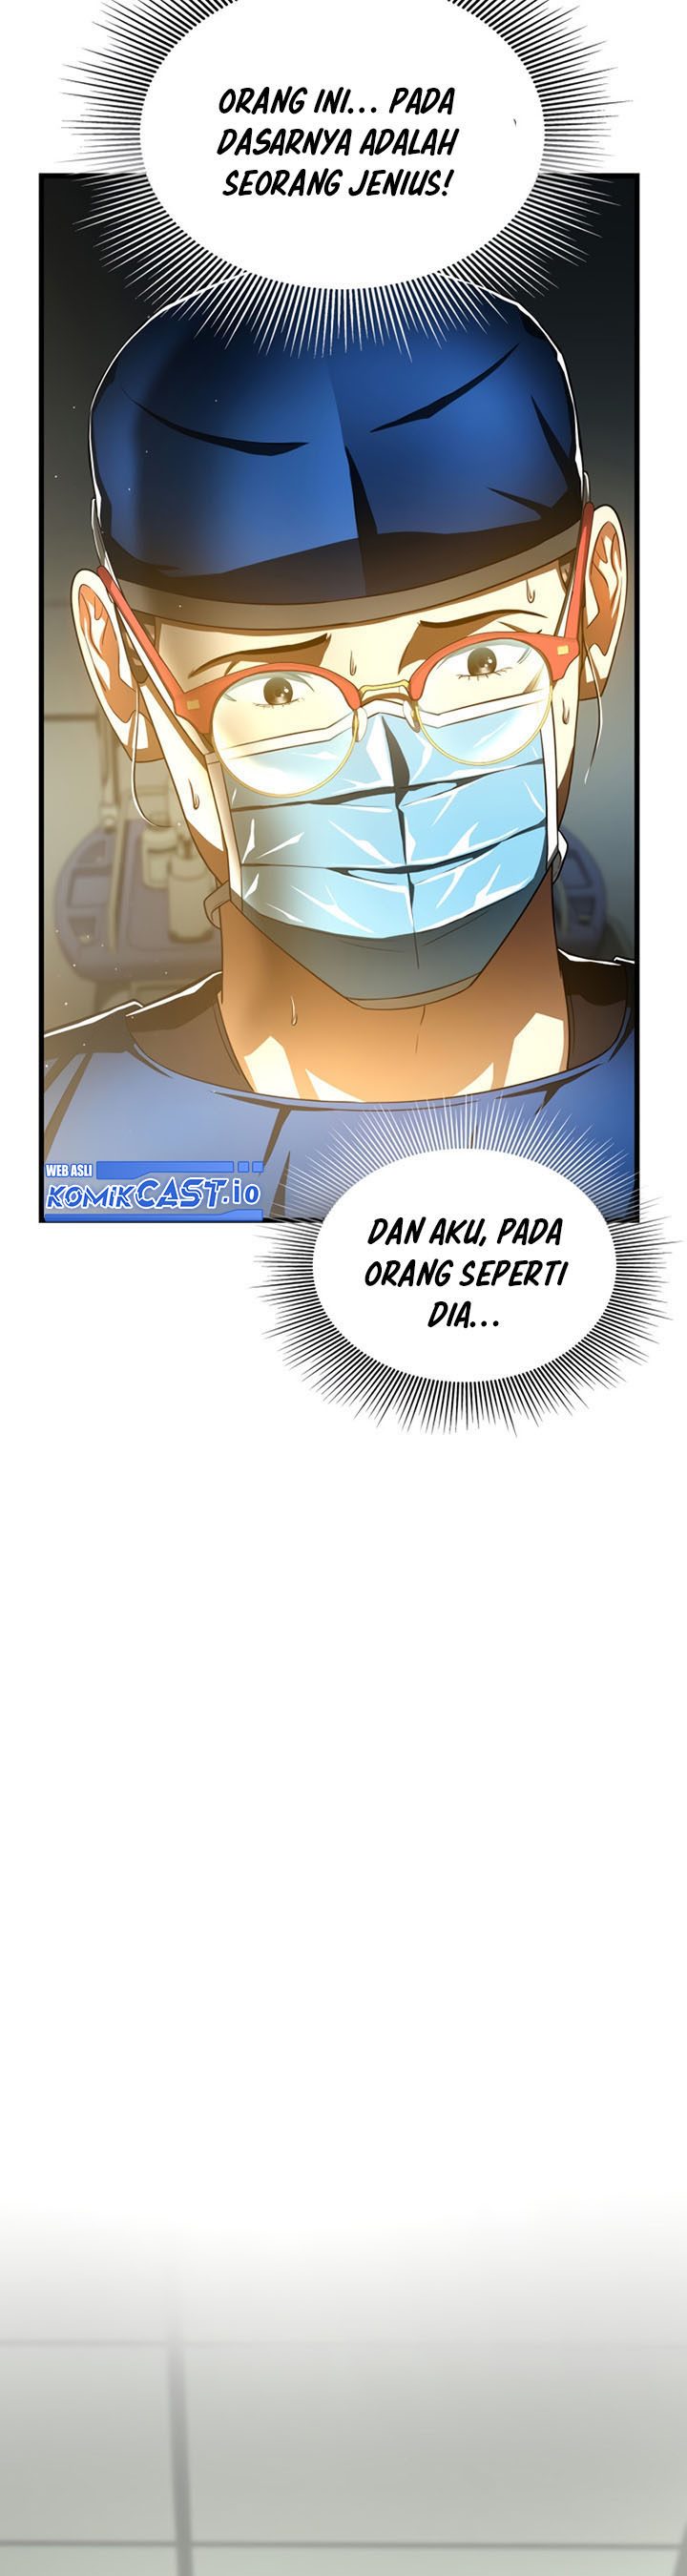 Perfect Surgeon Chapter 76